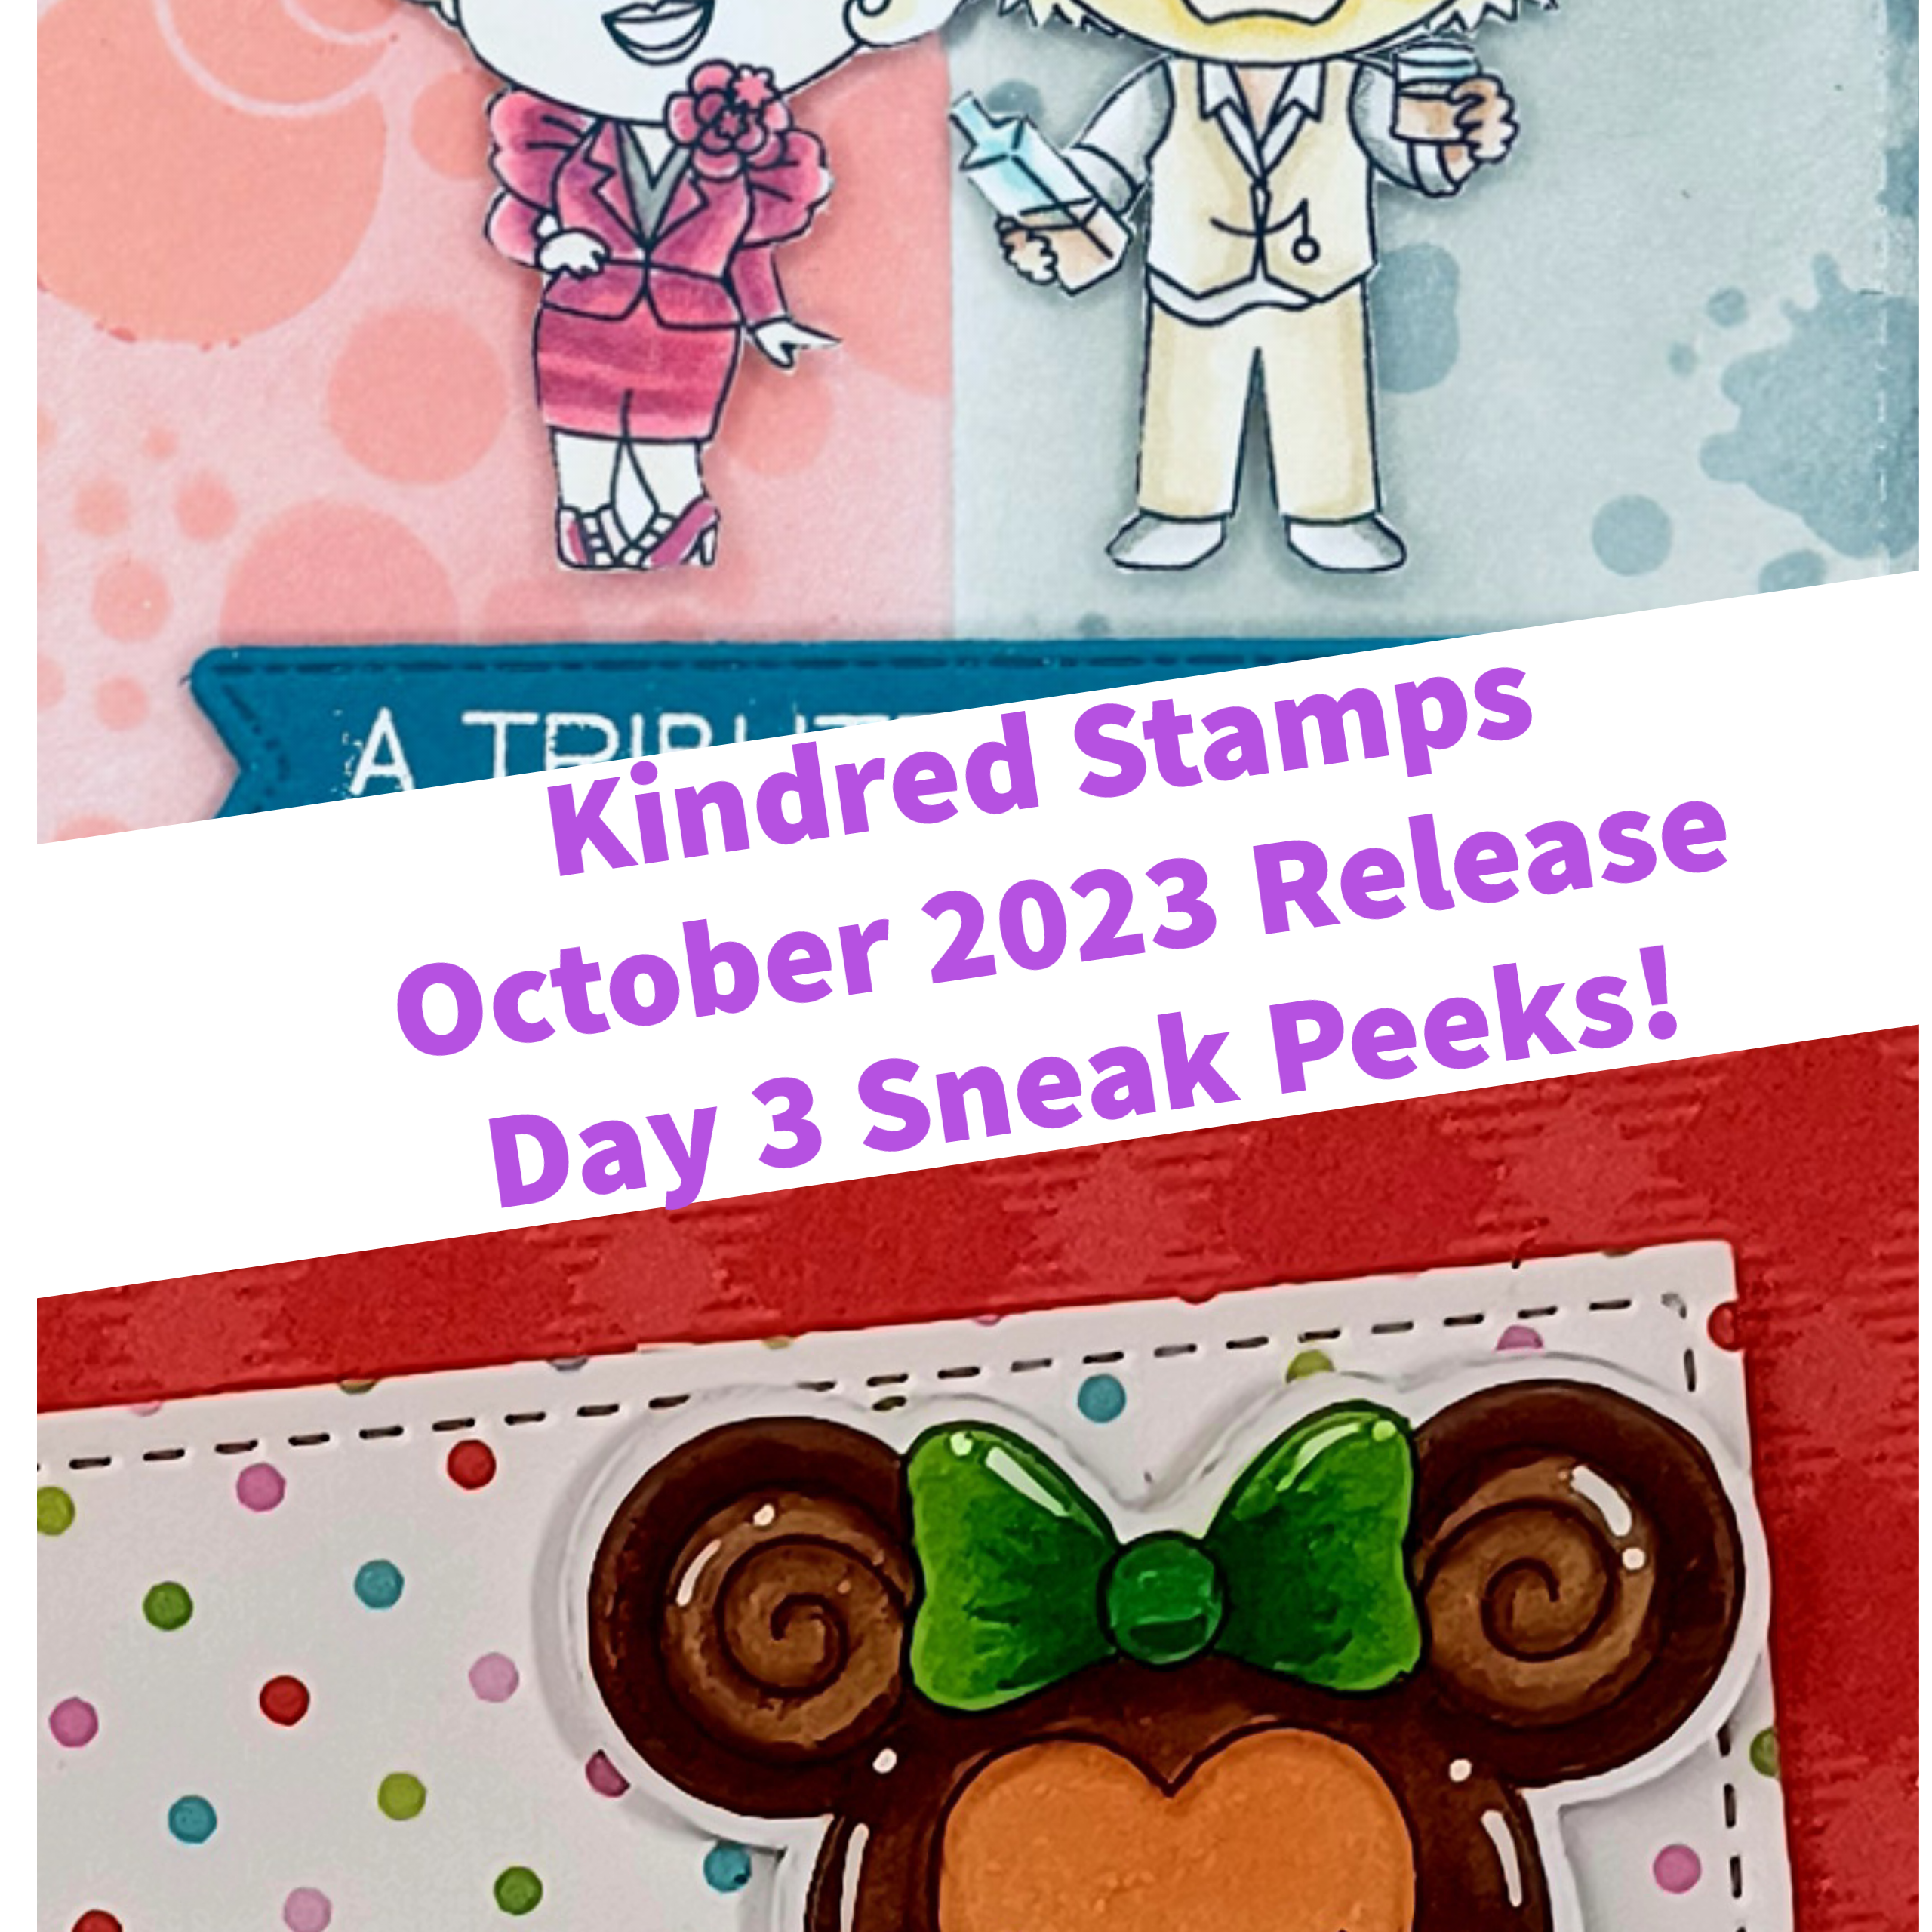 October Release Day 3 - Tributes and Gingerbread Pals